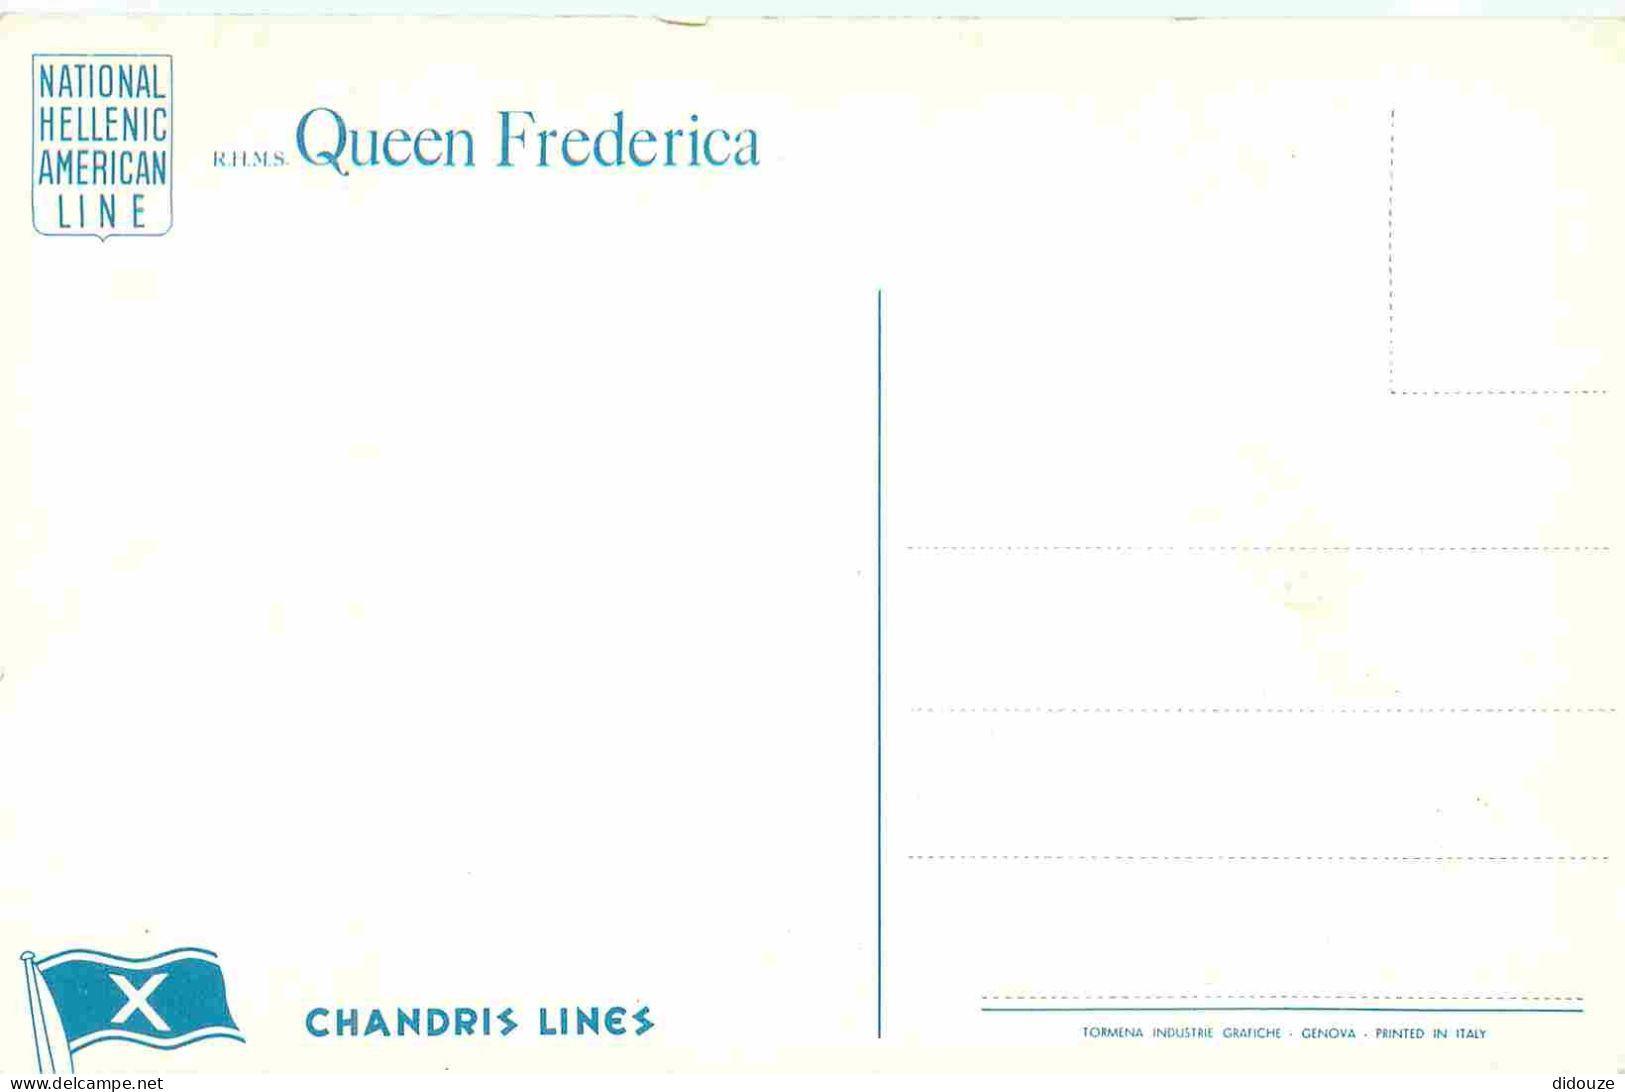 Bateaux - Paquebots - Queen Frederica - National Helenic American Line - Chandris Lines - CPM Format CPA - Voir Scans Re - Paquebots